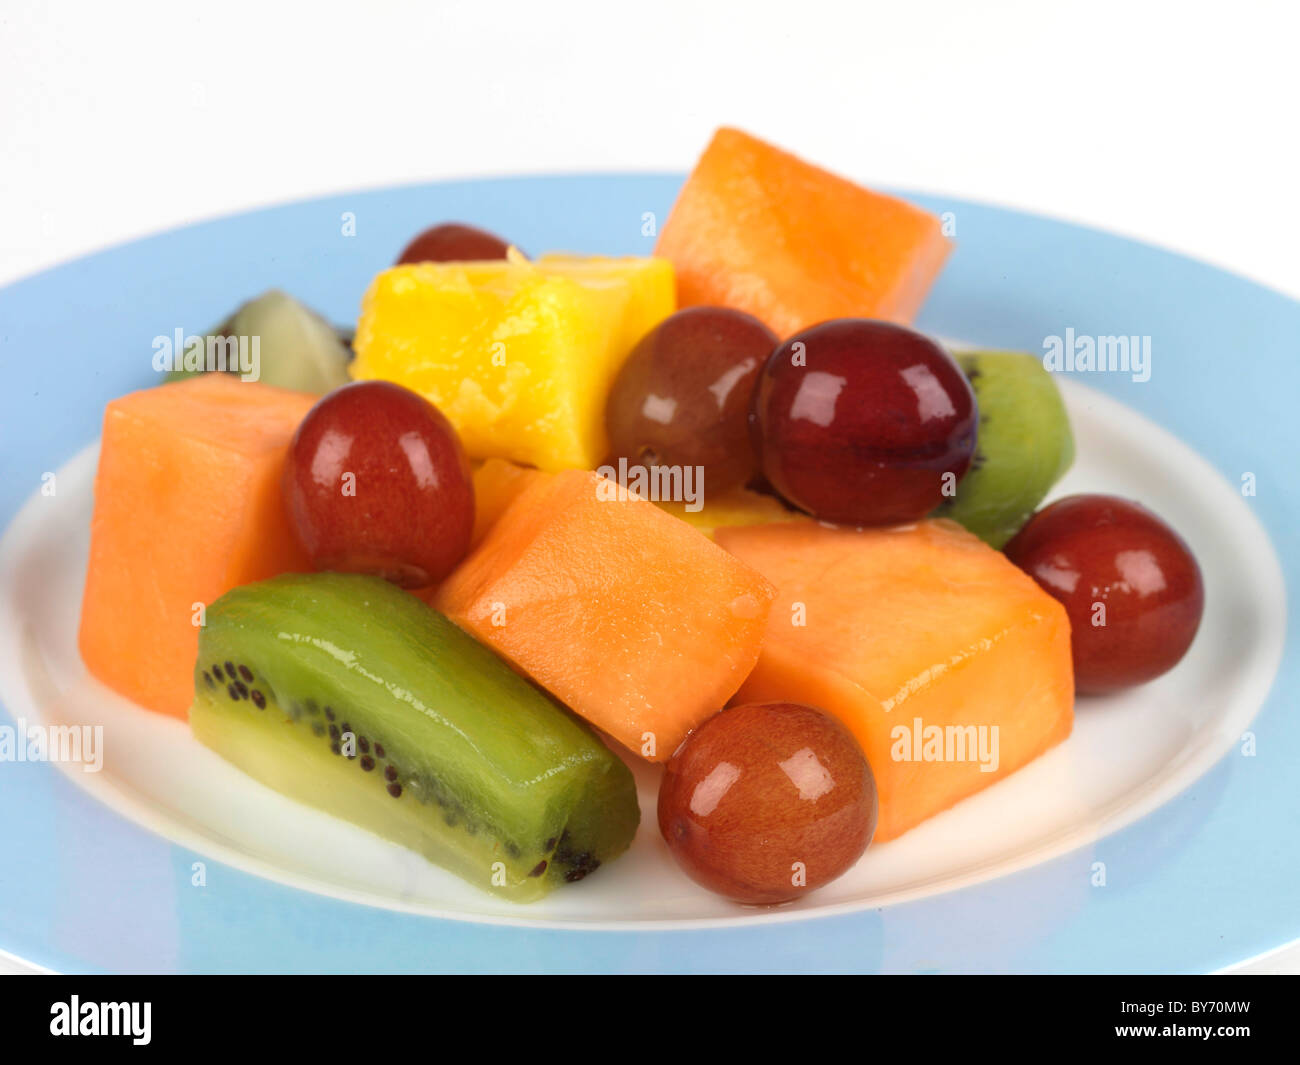 Fresh Healthy Tropical Fruit Salad Against A White Background With A Clipping Path And No People Stock Photo